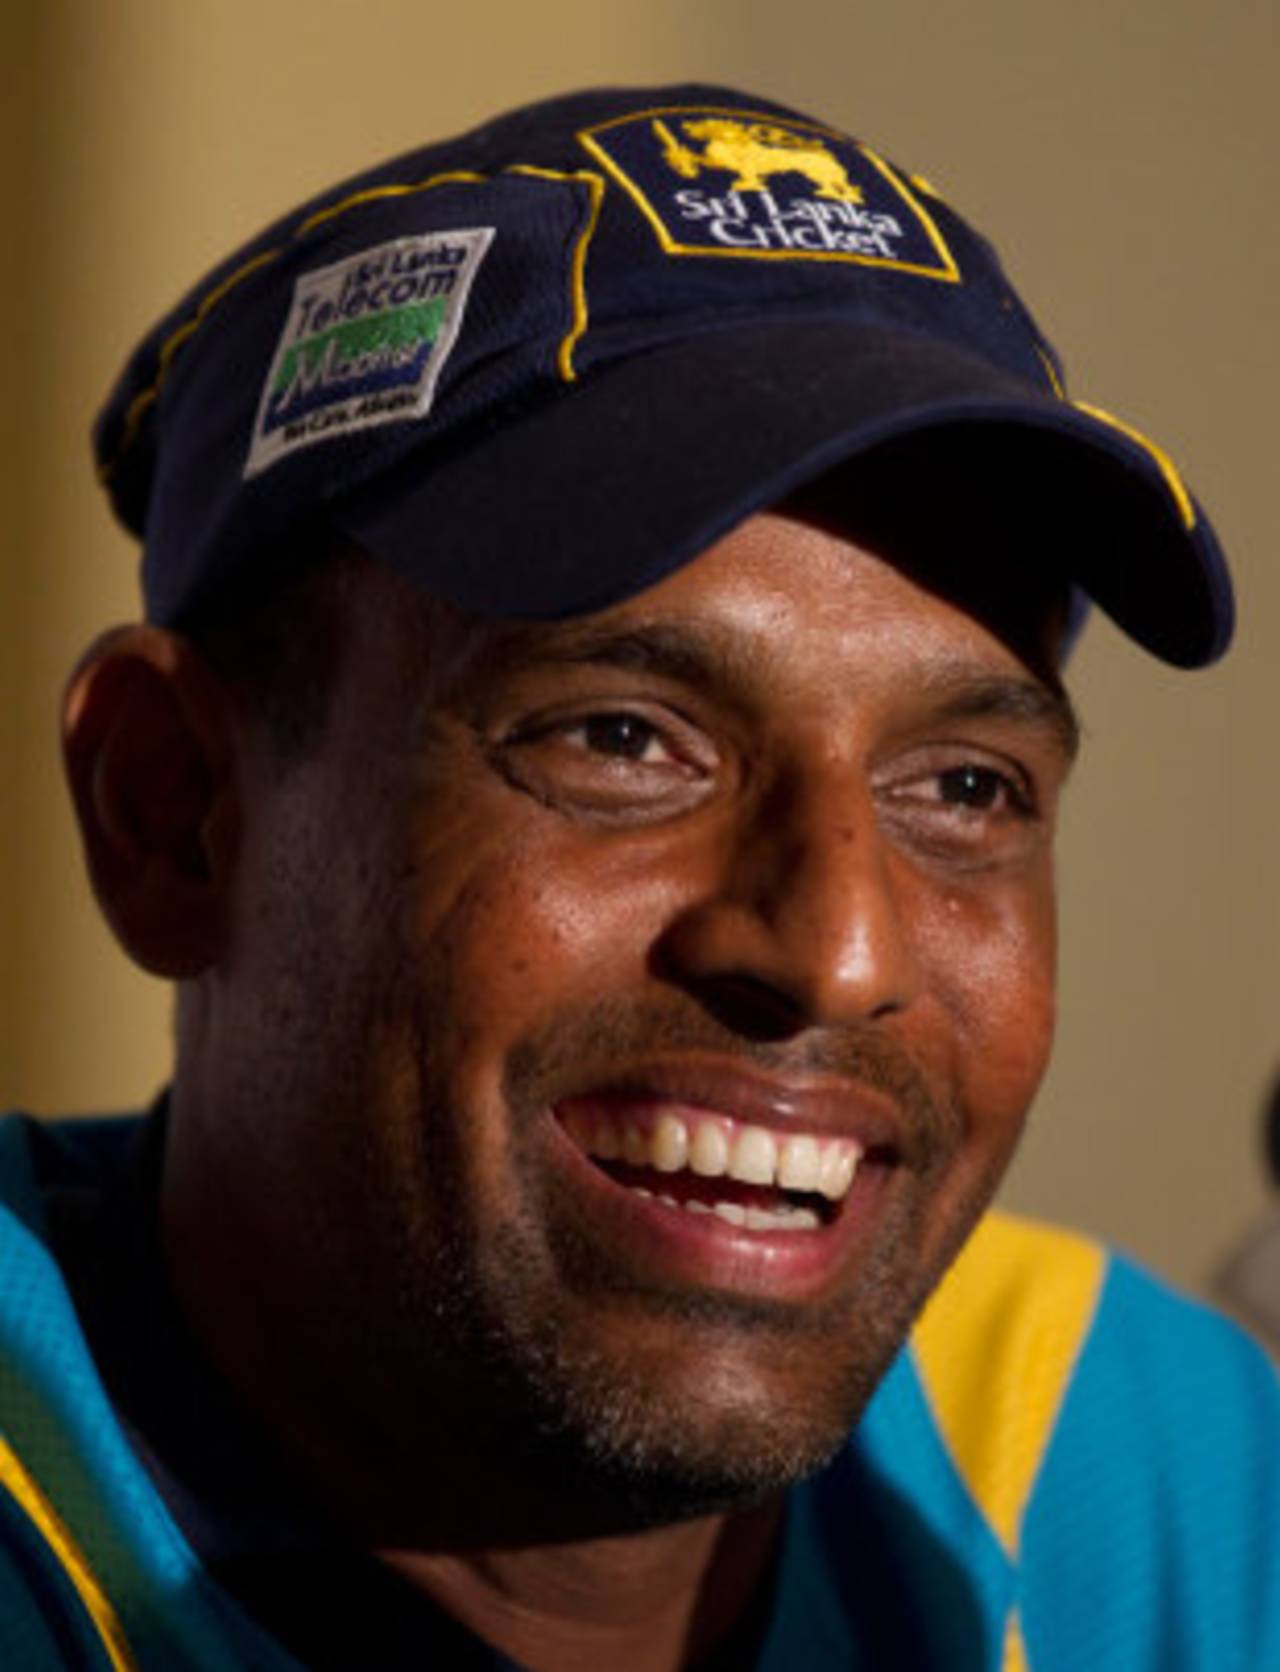 Thilan Samaraweera is all smiles at a media briefing, Colombo, March 6, 2013